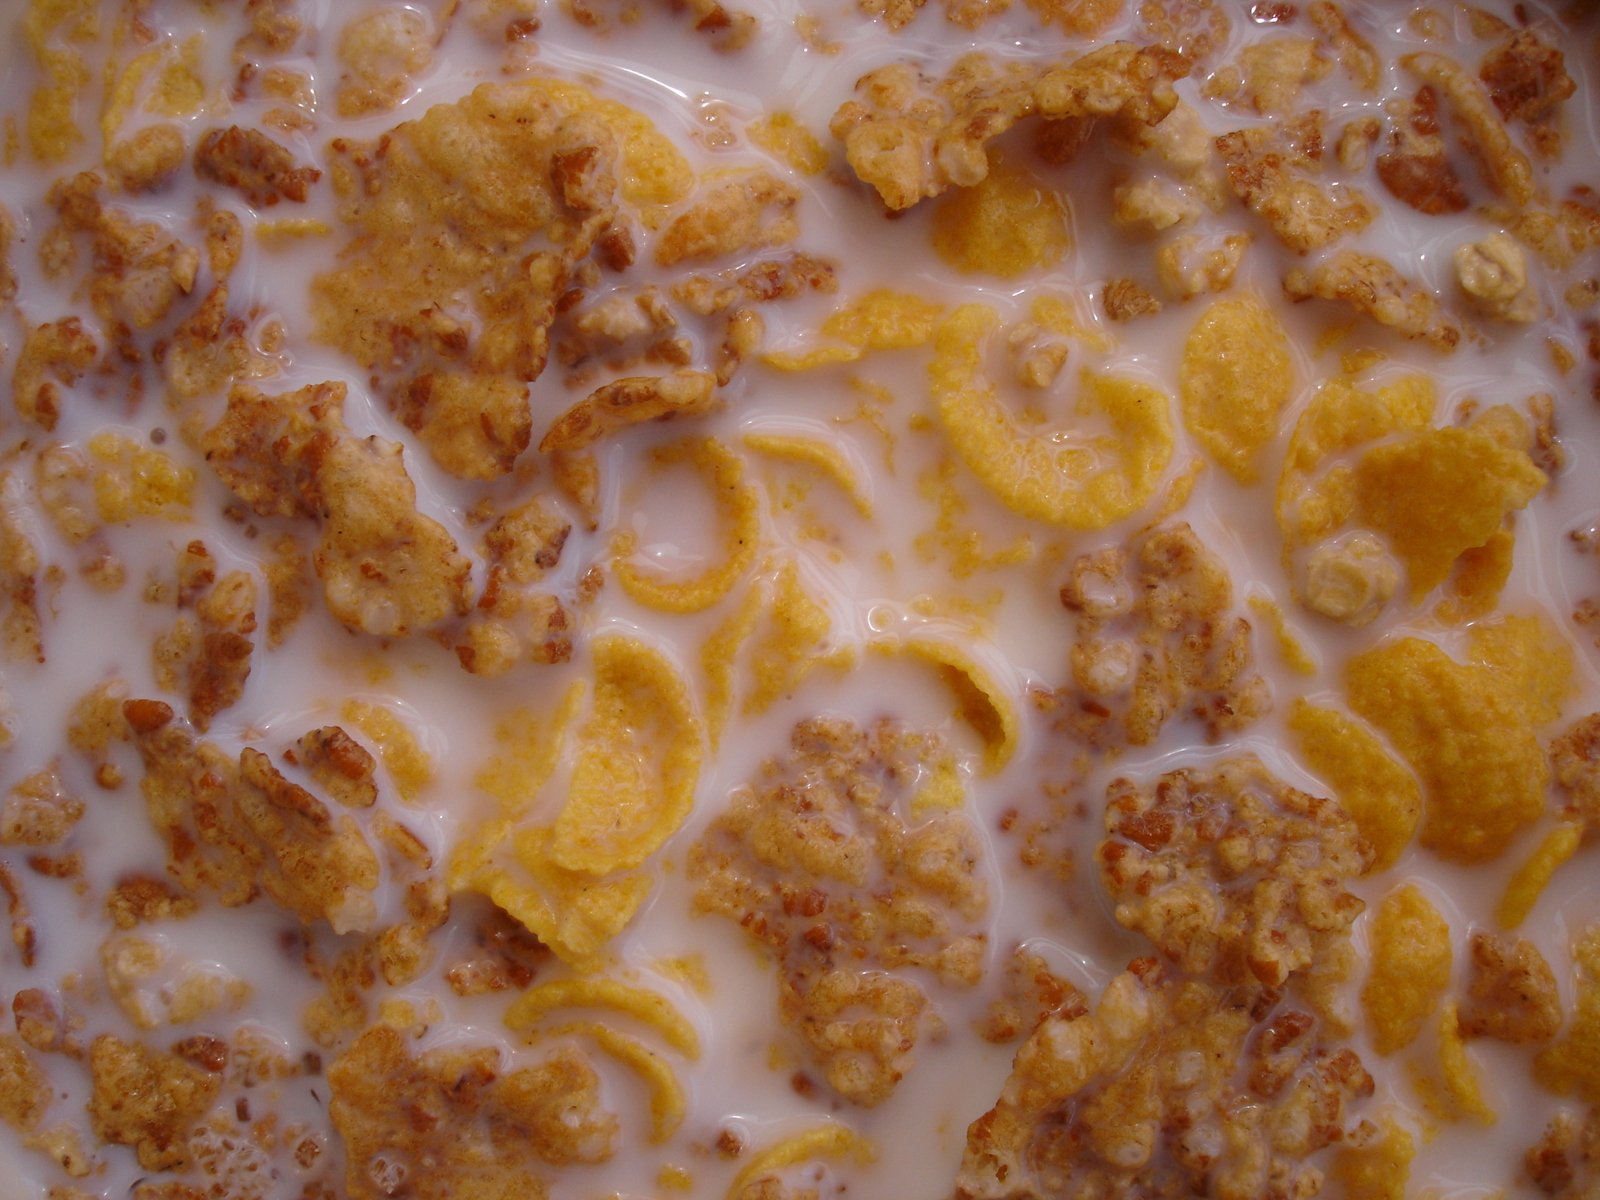 close up of cheese and other cereal toppings